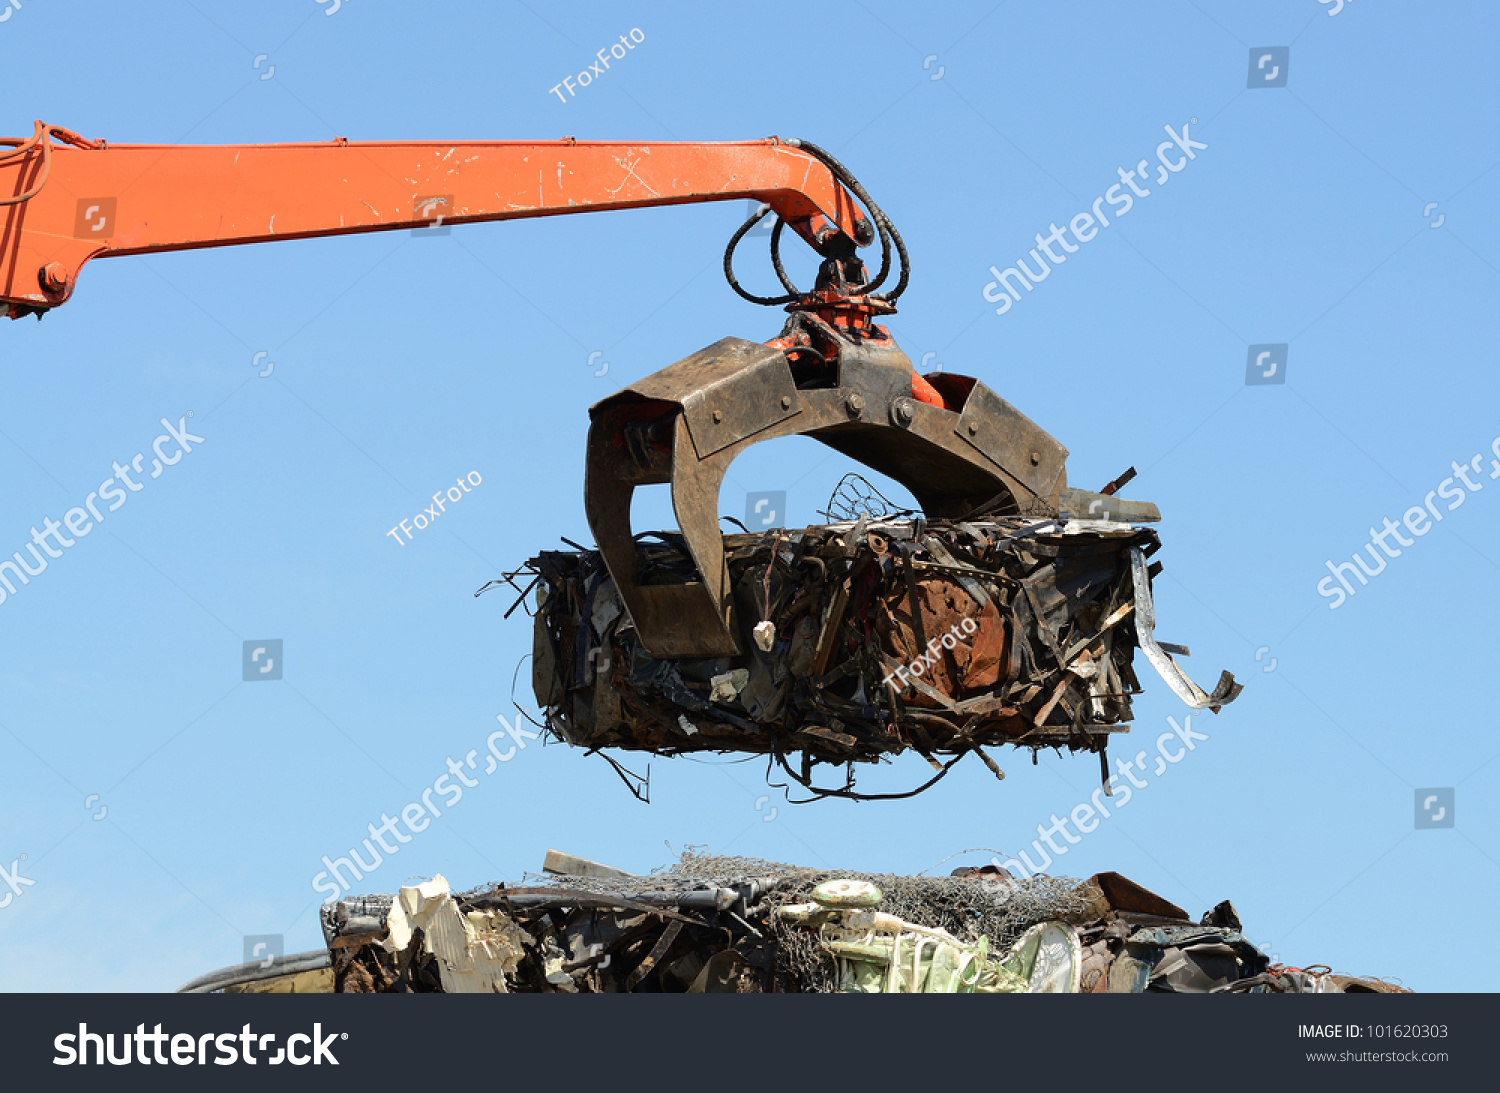 stock-photo-a-claw-on-a-compactor-moves-